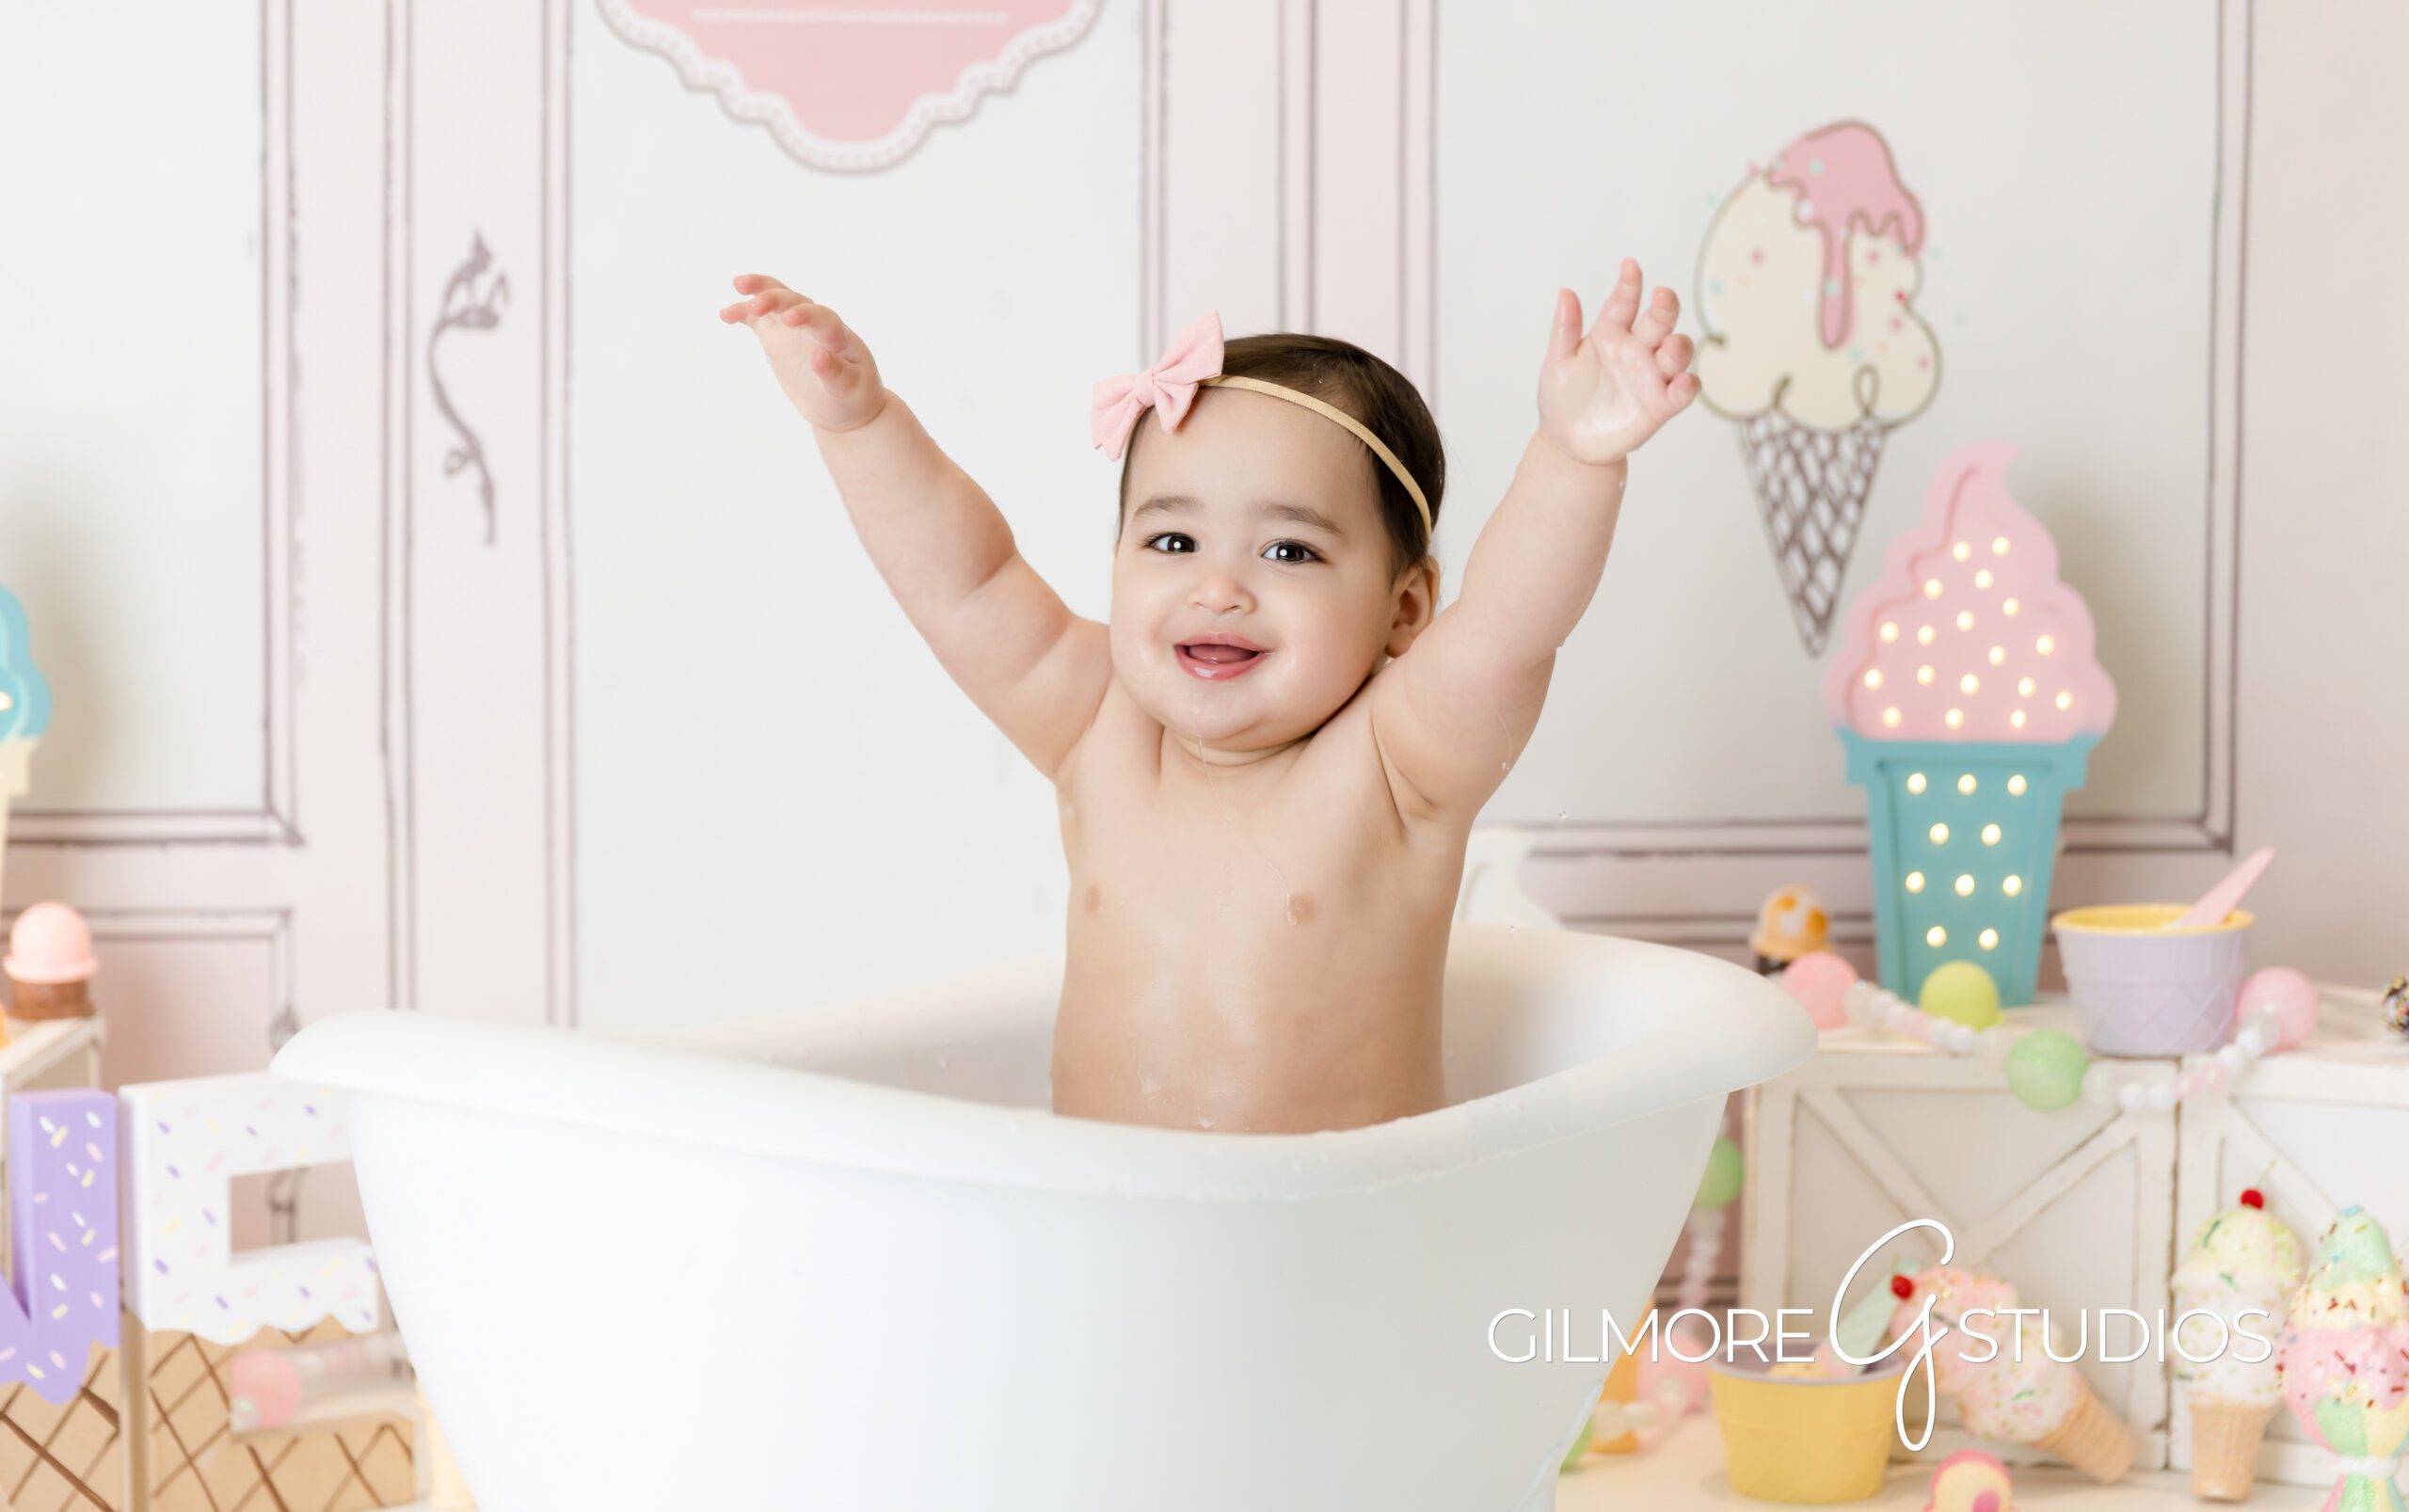 ice cream theme cake Smash, little girl, little girl with arms up, bathtub, smiling, photography, Gilmore Studios